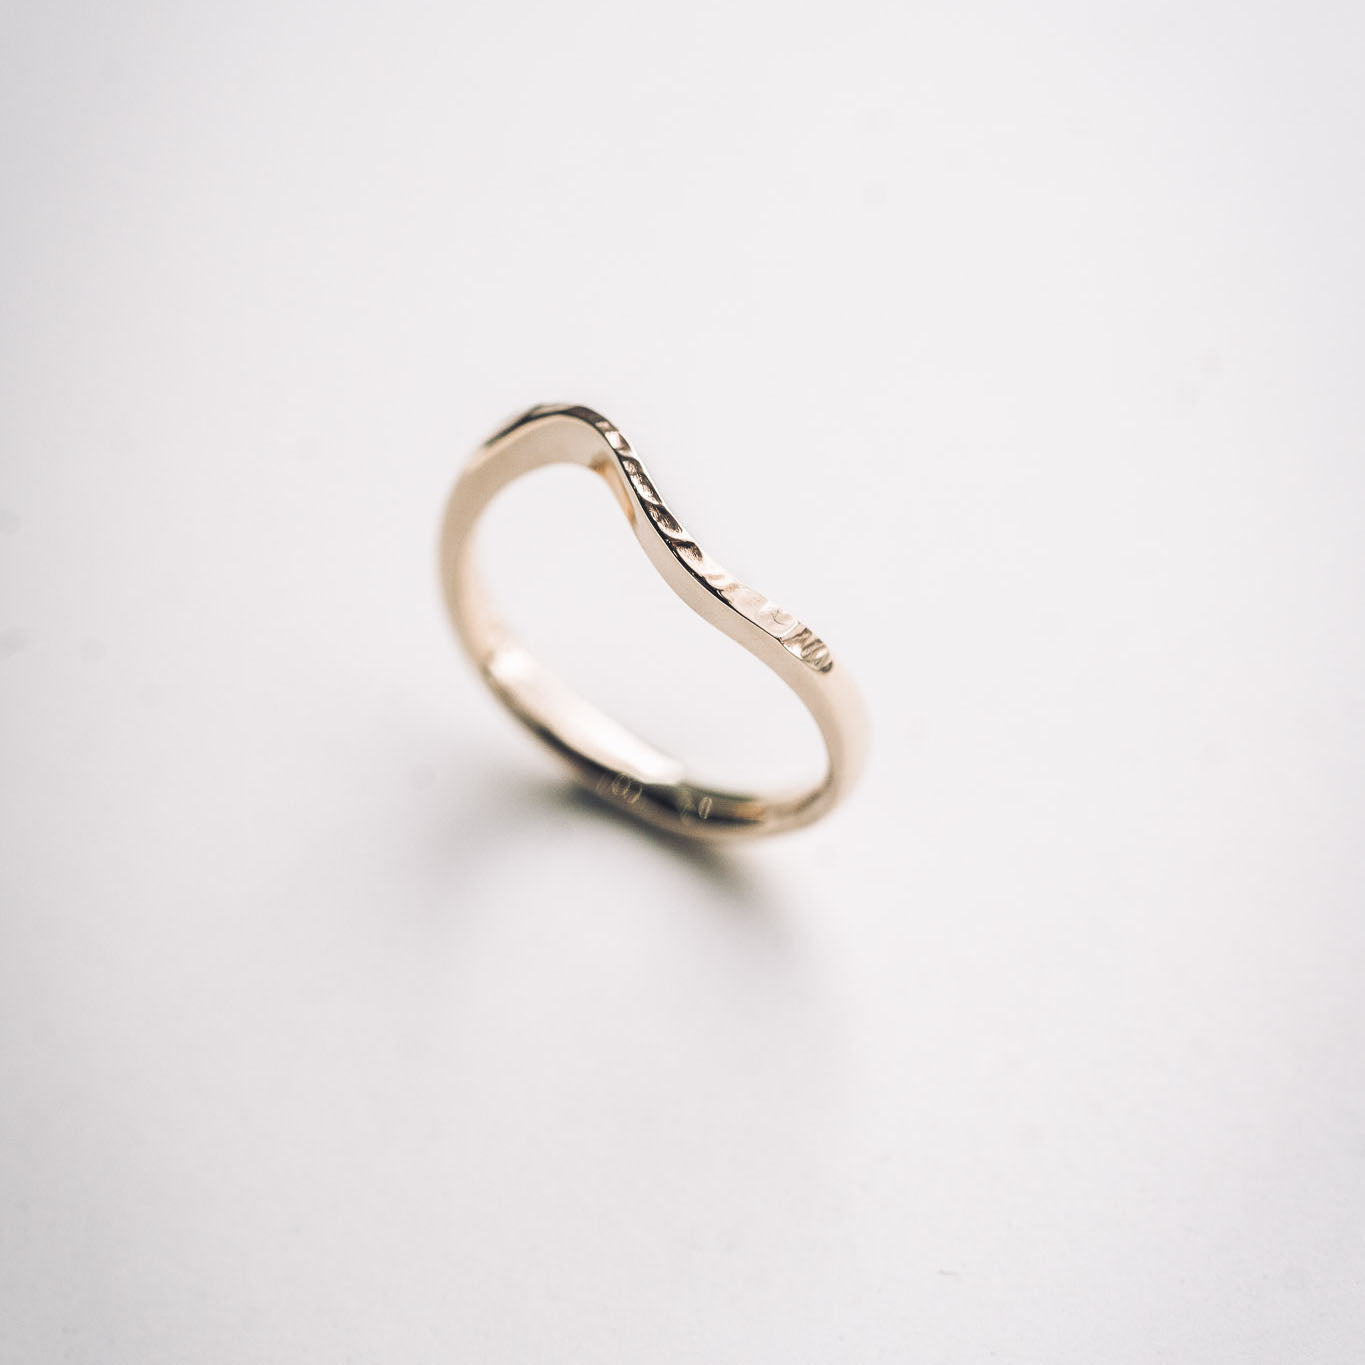 Handmade Textured 9ct Gold Ring With a Subtle Wave